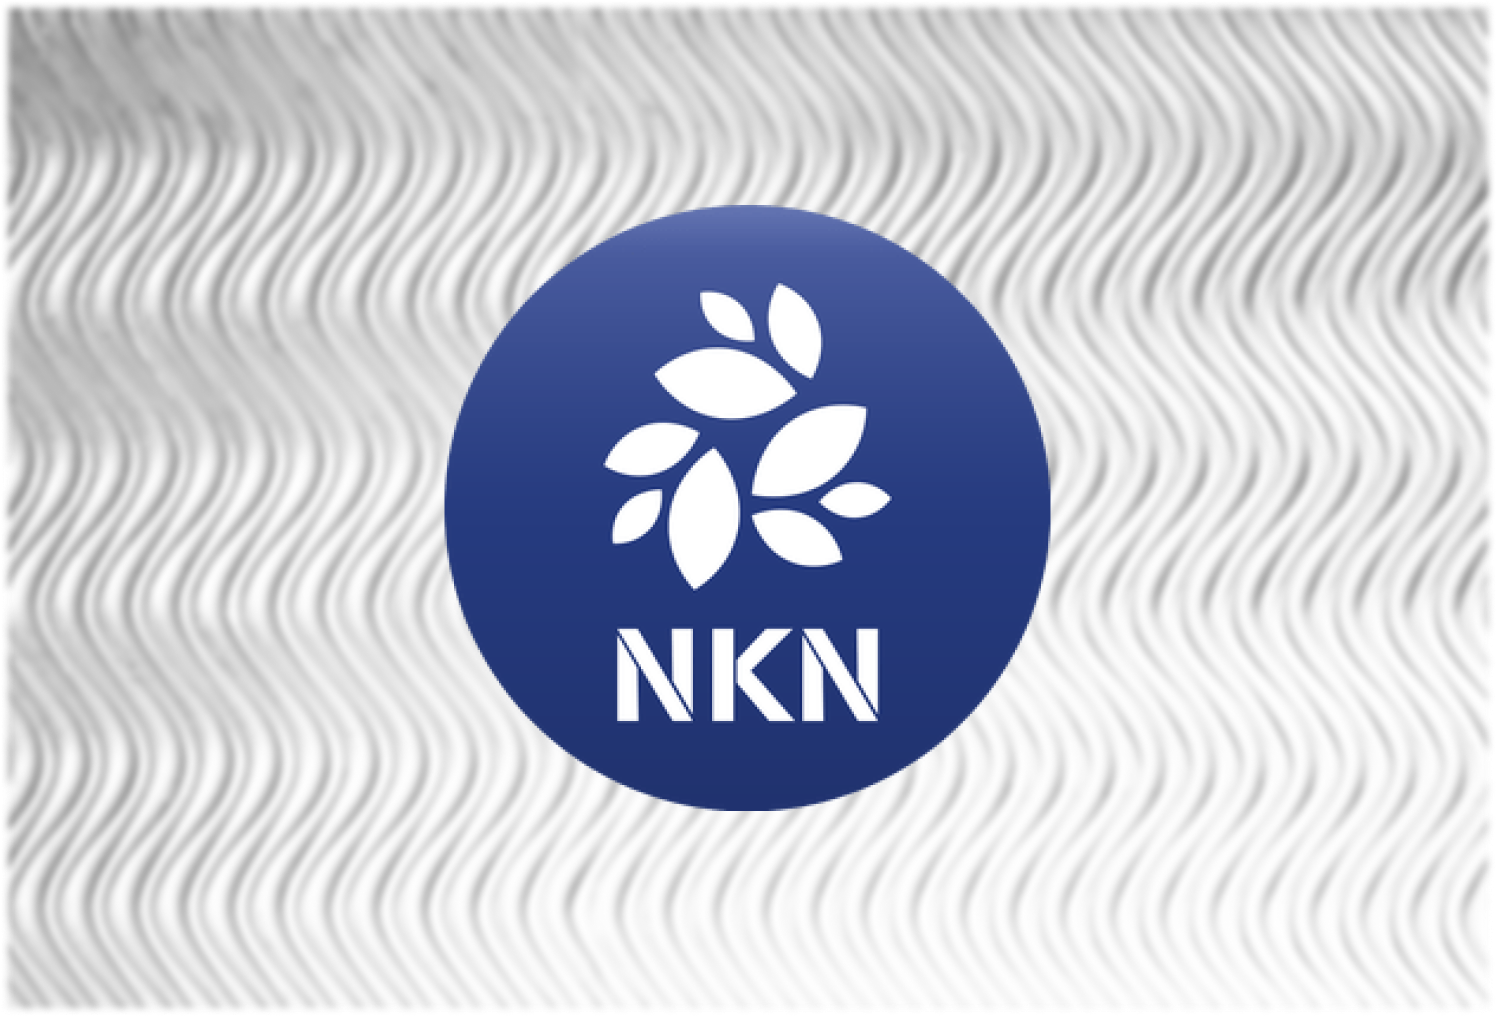 images/NKN.png